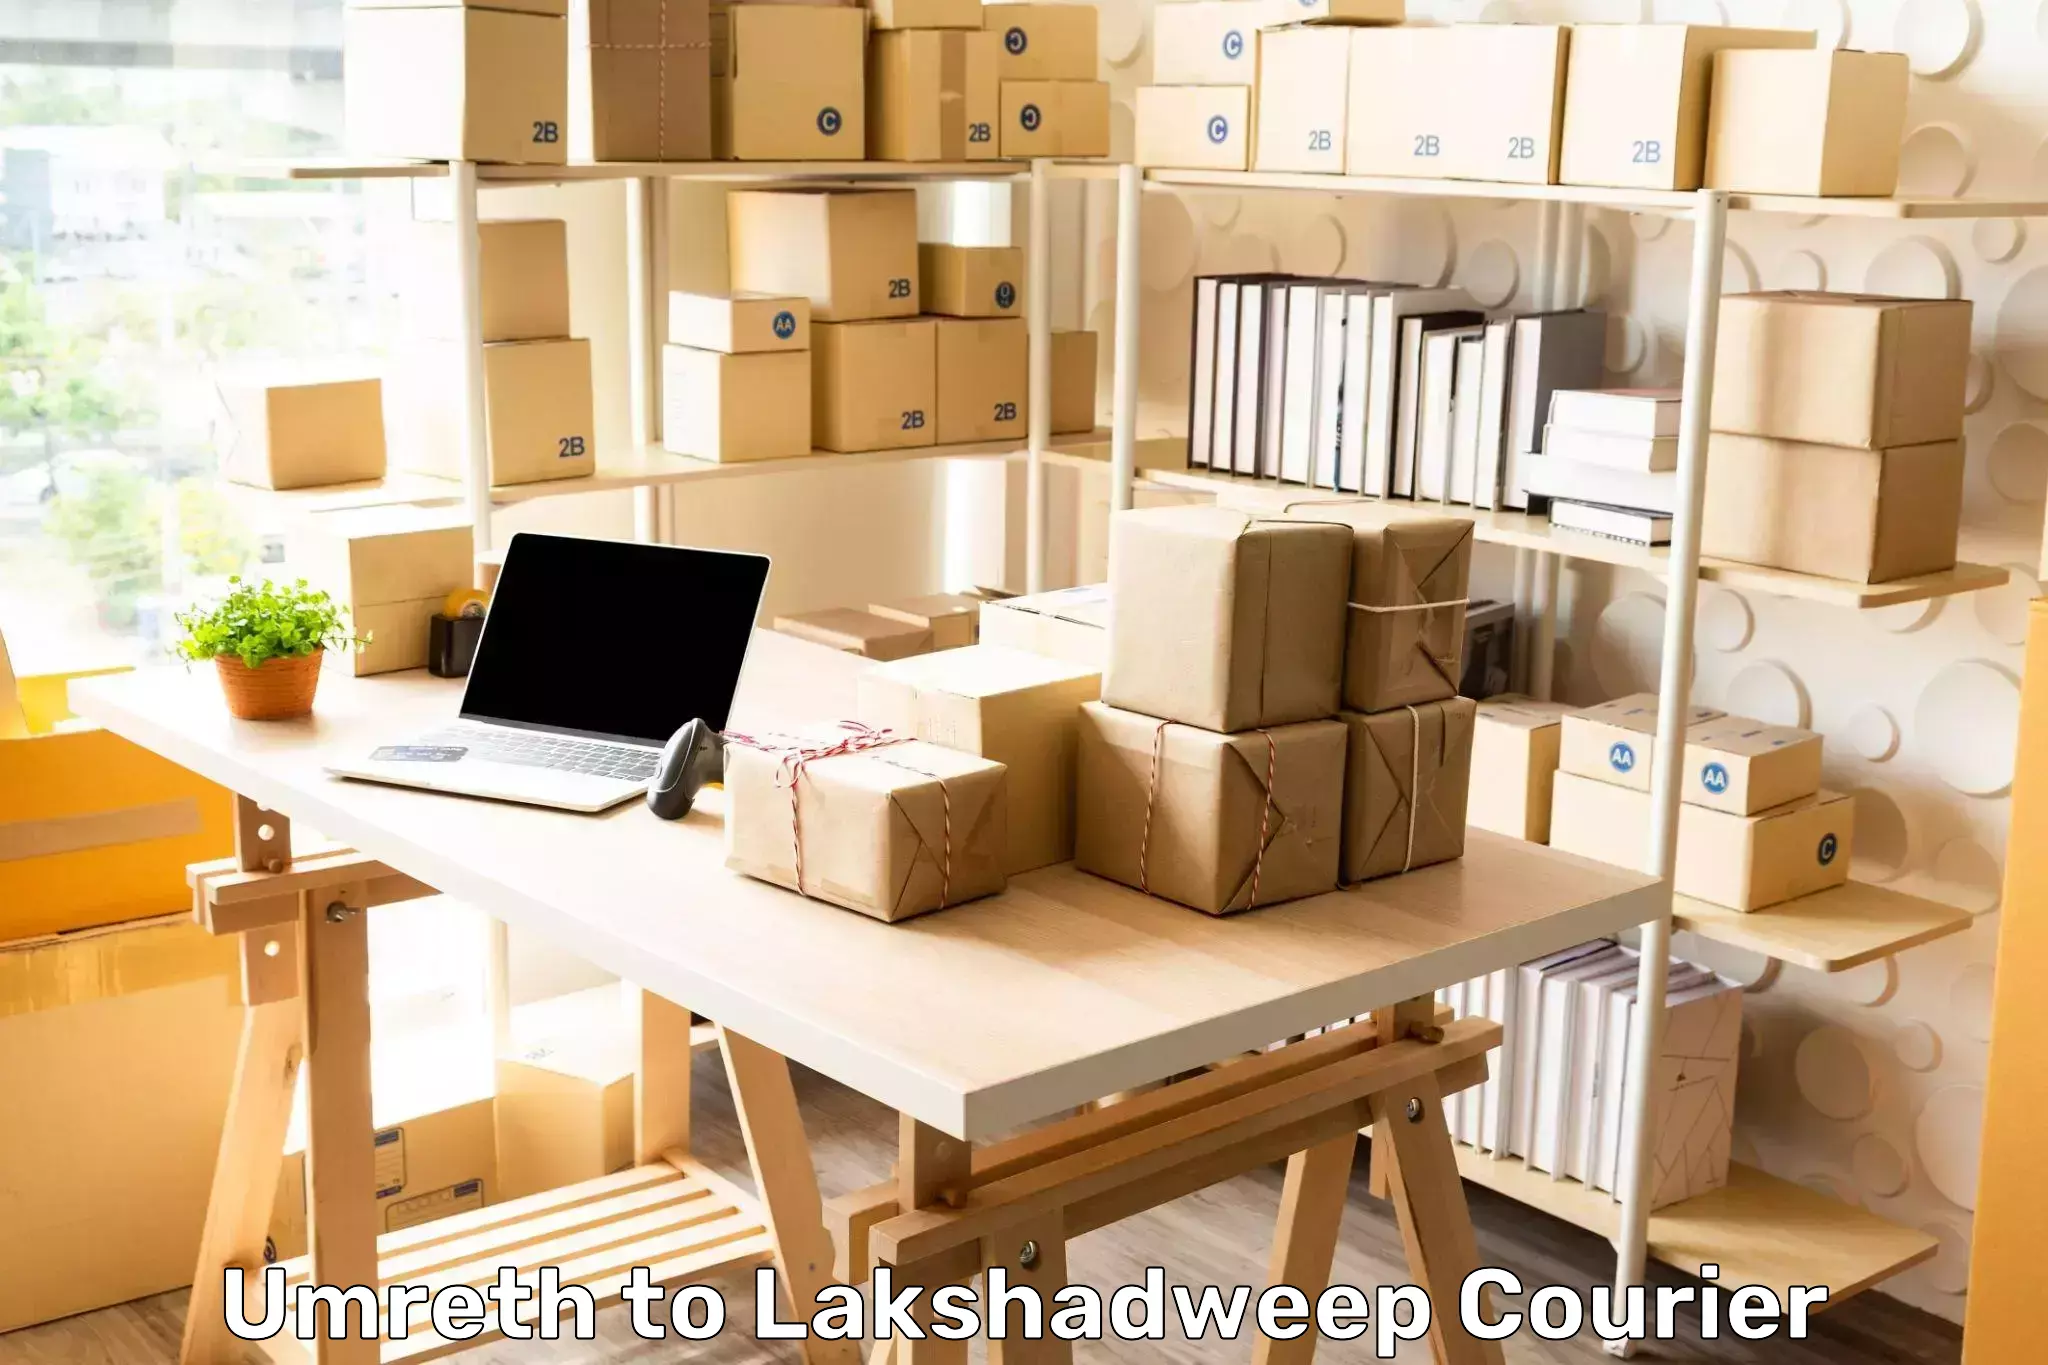 Same-day delivery solutions Umreth to Lakshadweep